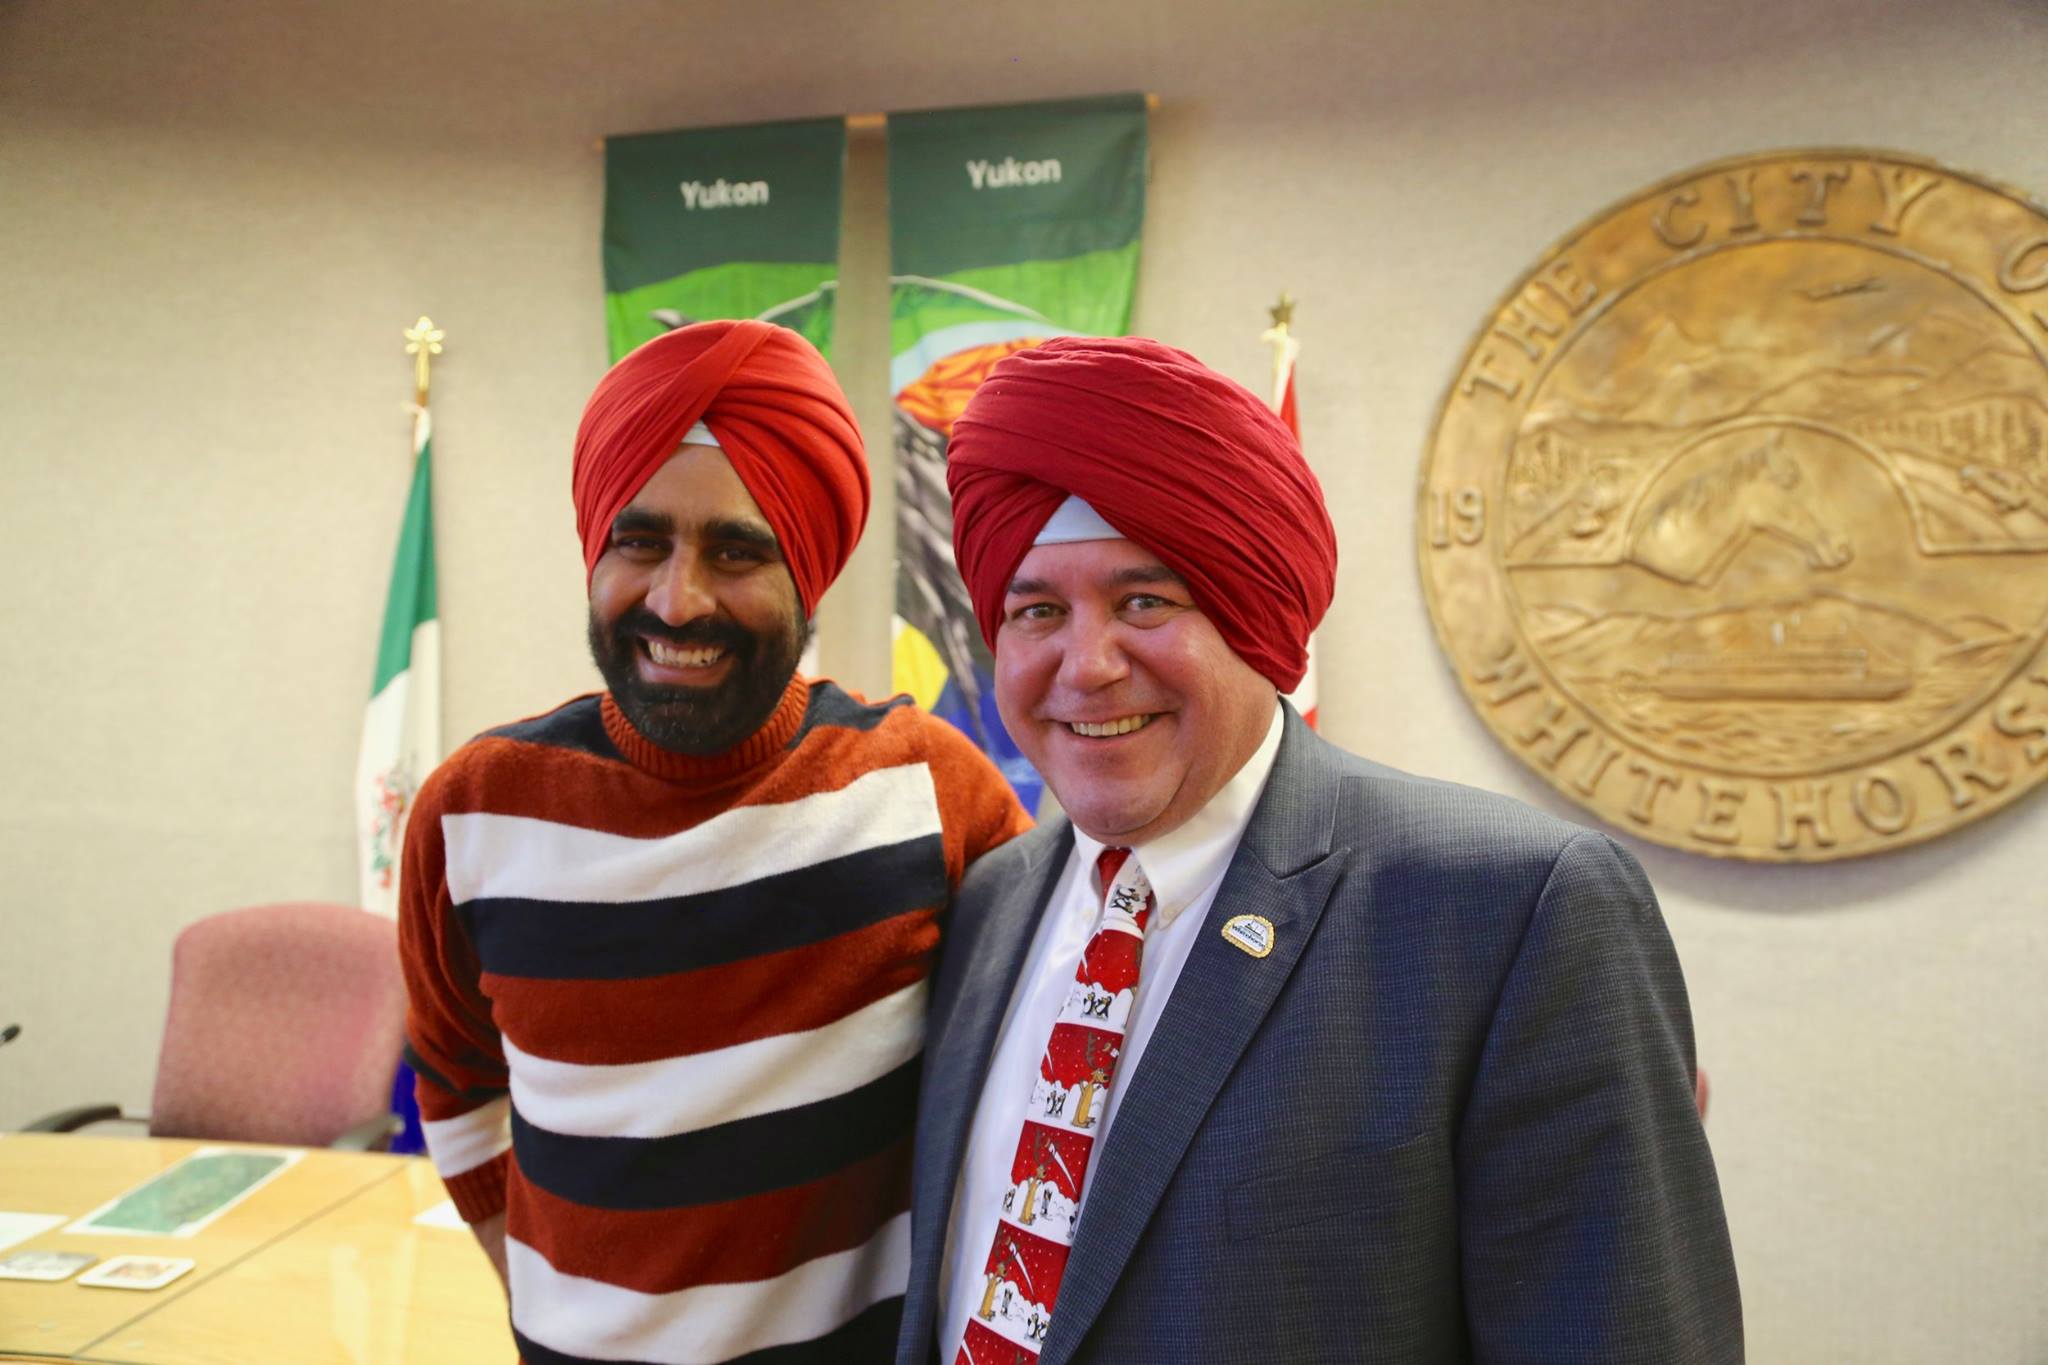 Gurdeep with the Mayor of Whitehorse, Dan Curtis. Their video collaboration to raise turban awareness was watched by 12 million people on BBC News in 2017.